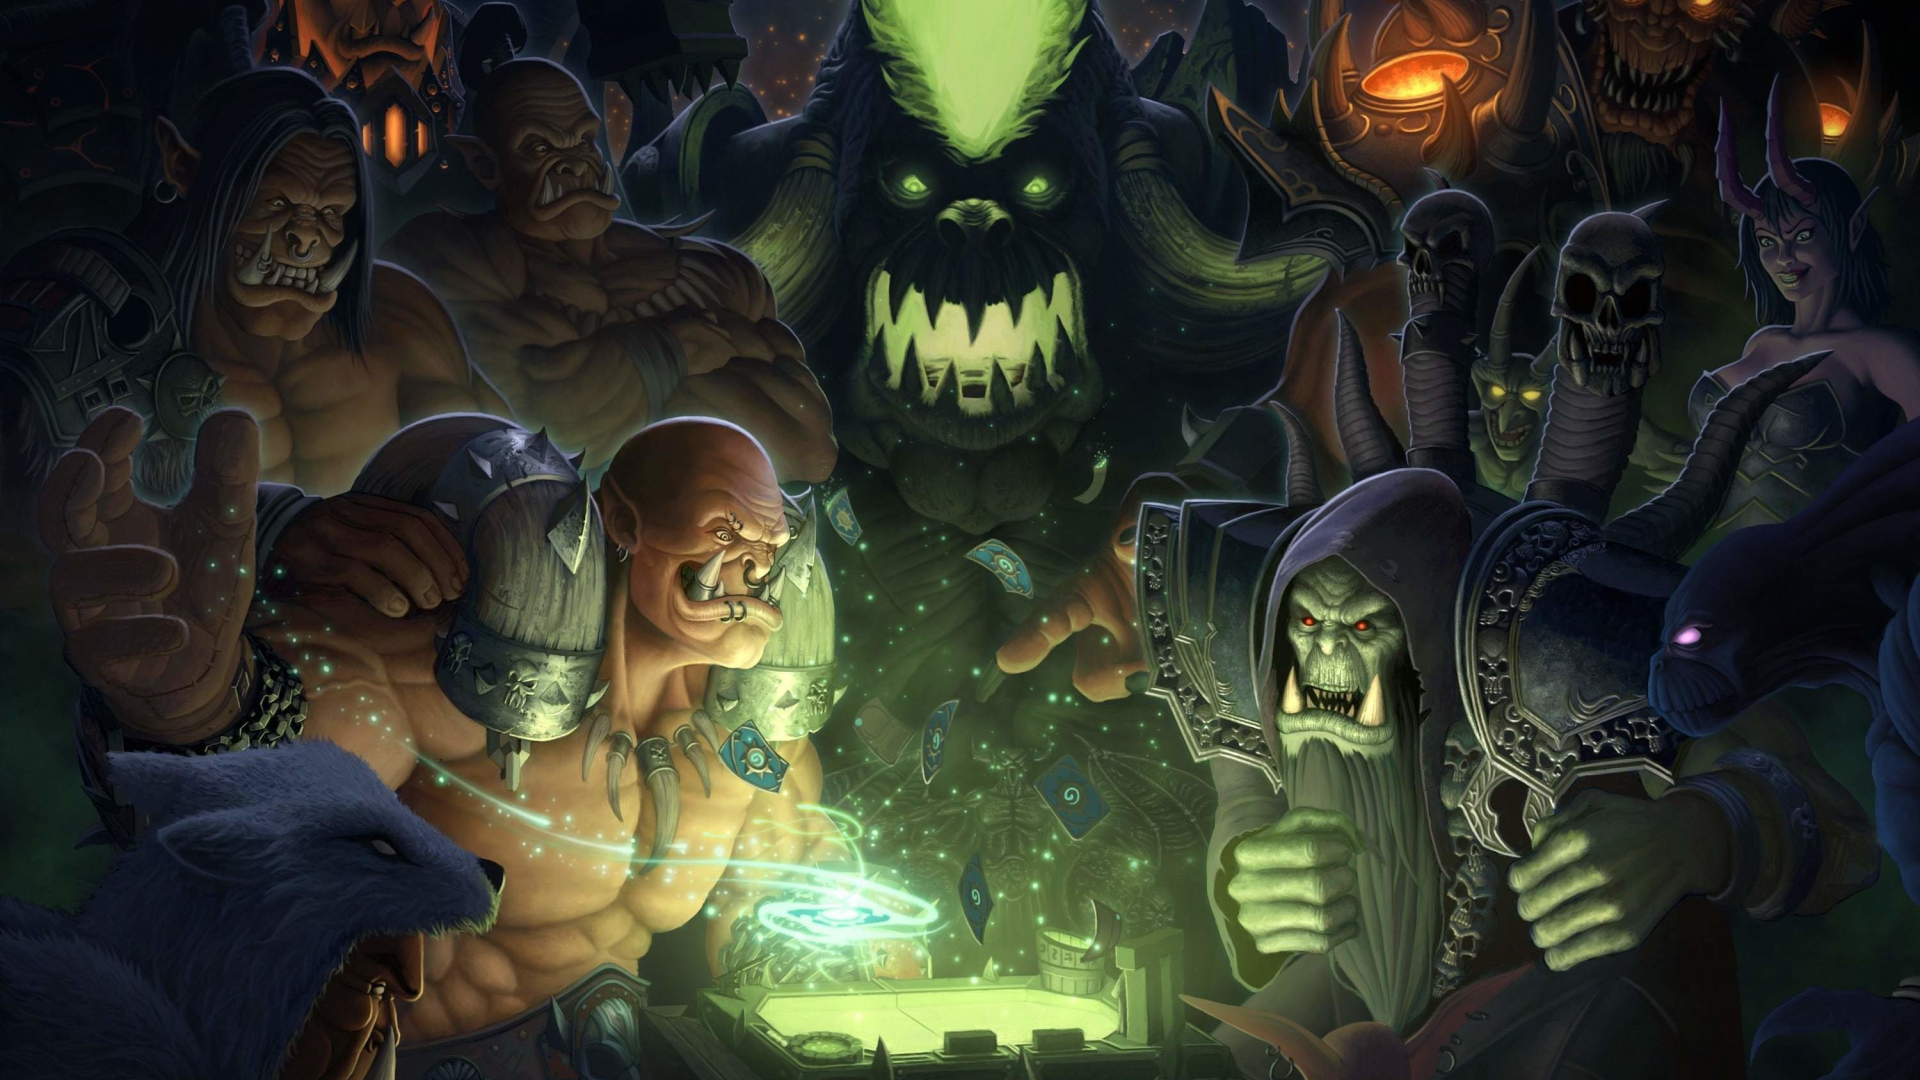 Download wallpaper 1920x1080 hearthstone heroes of warcraft play video  game full hd hdtv fhd 1080p wallpaper 1920x1080 hd background 1204